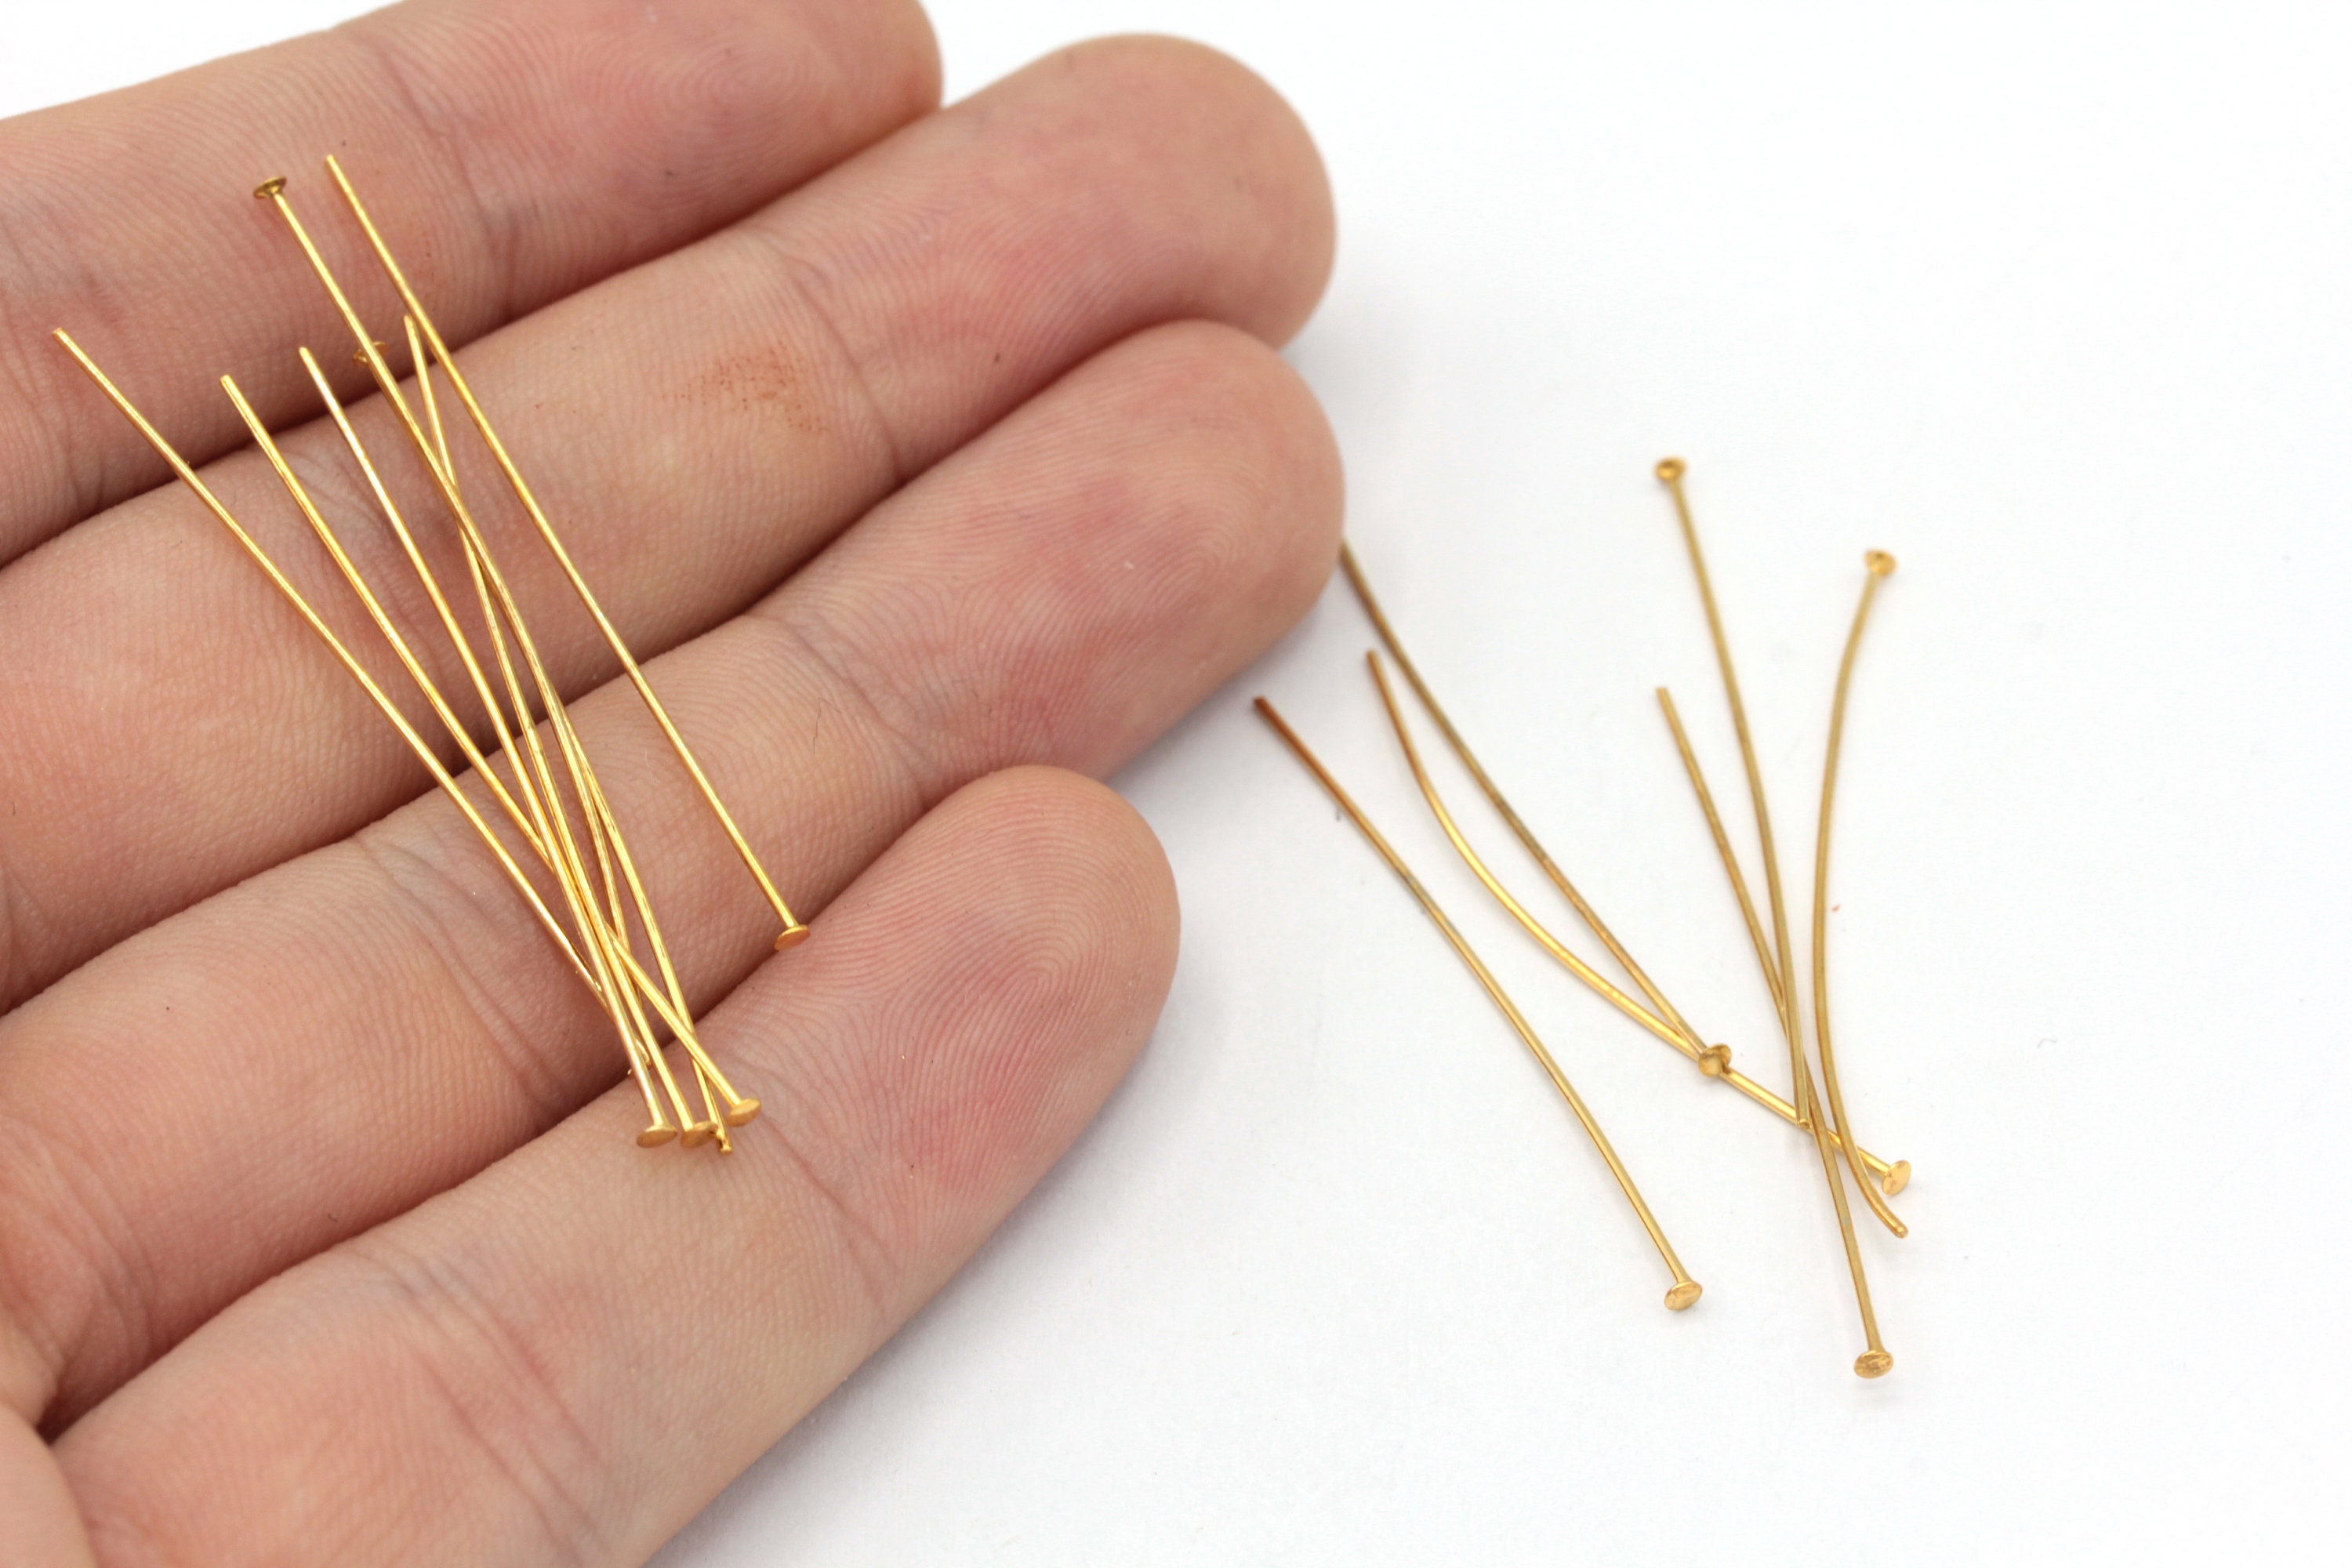 Jewelry Head Pins for Jewelry Making | Ship Straight and Unbent (150  Pieces, 3 Inches, 76mm, 22 Gauge) Flat-Head Brass Dressmaker Headpins |  Jewellery